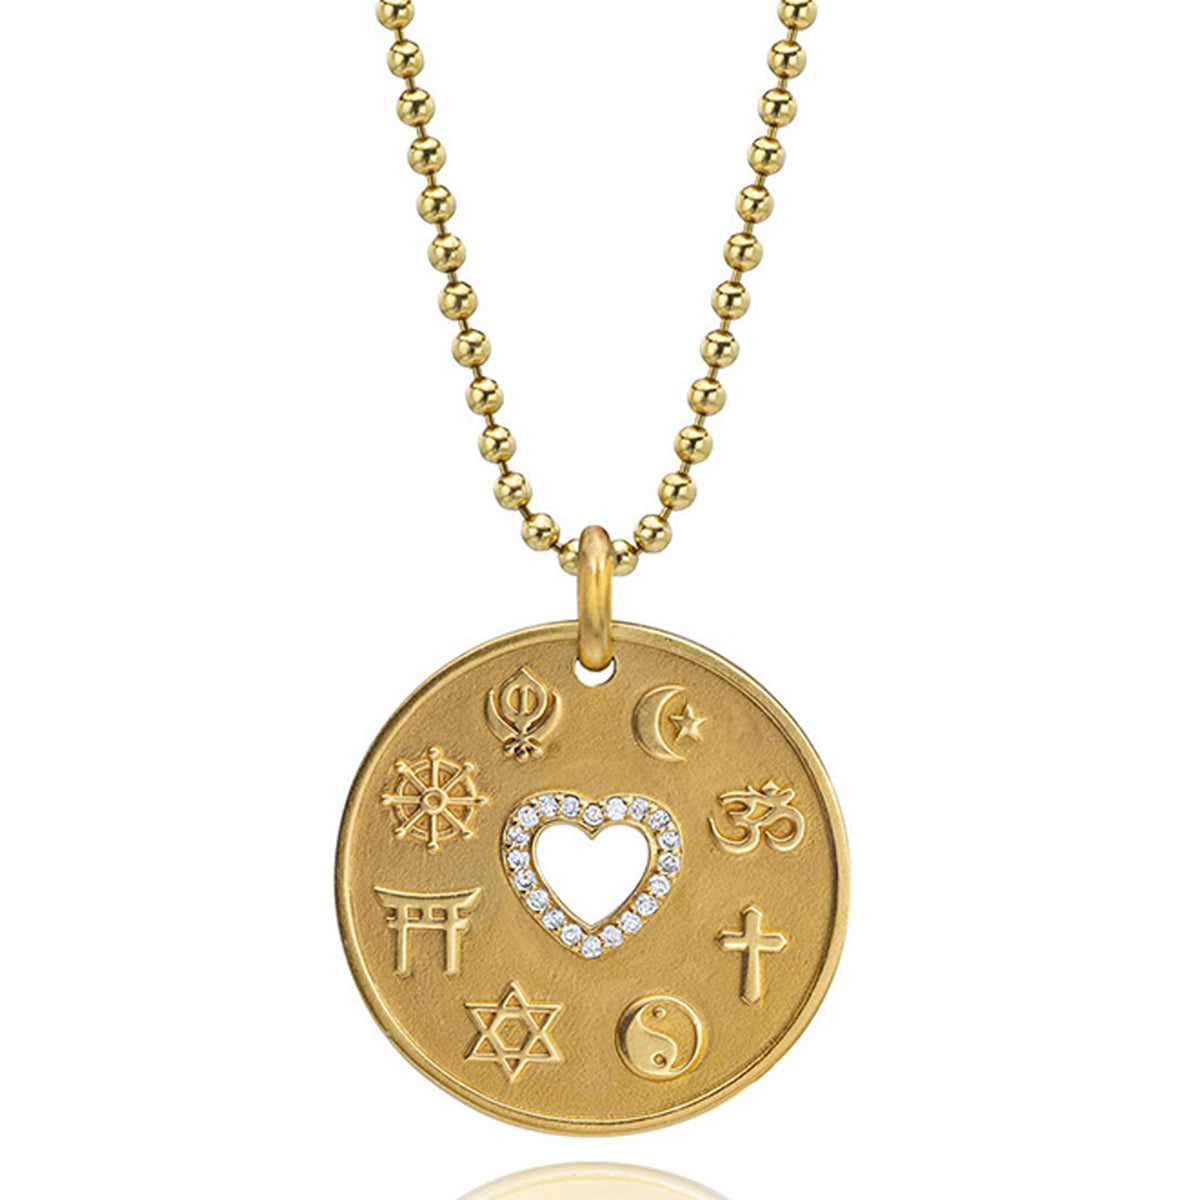 Love Is My Religion Yellow Gold Vermeil on Faceted Ball Chain - Delivery December 20th